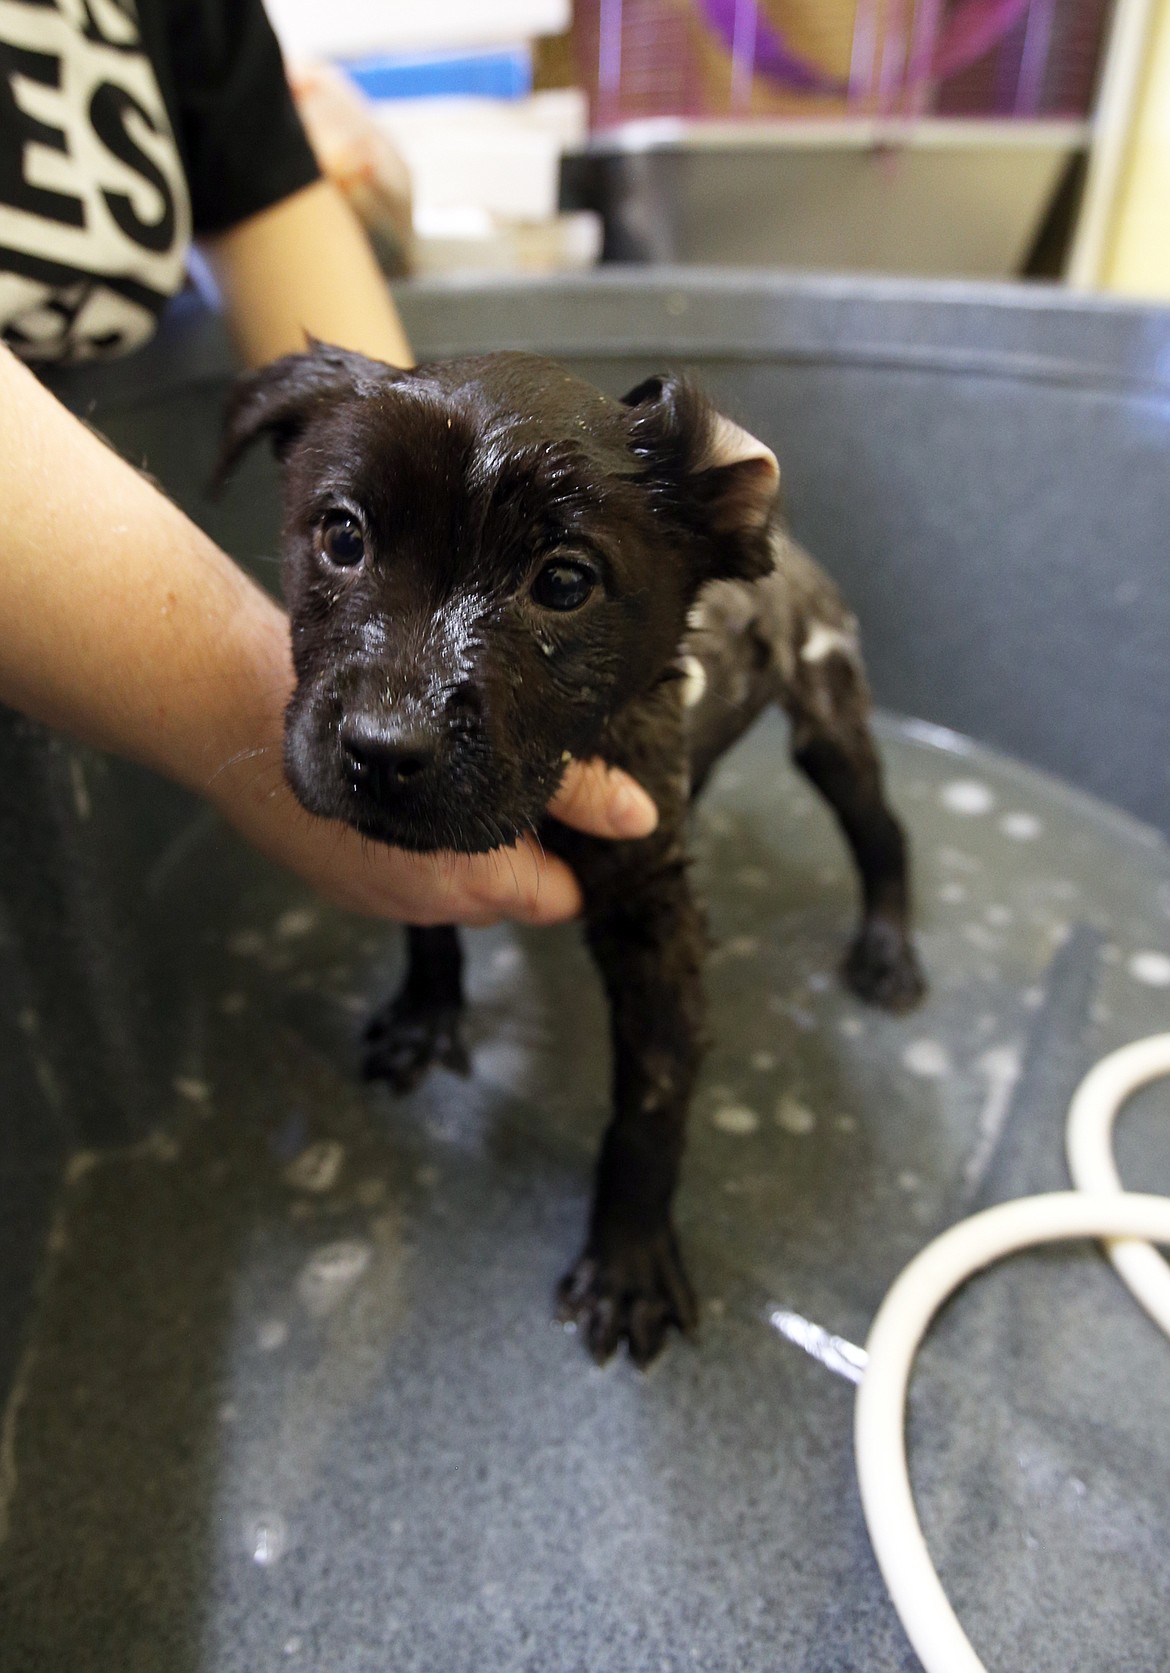 A puppy from Oklahoma via Wings of Rescue gets washed down at the Kootenai Humane Society on Wednesday.